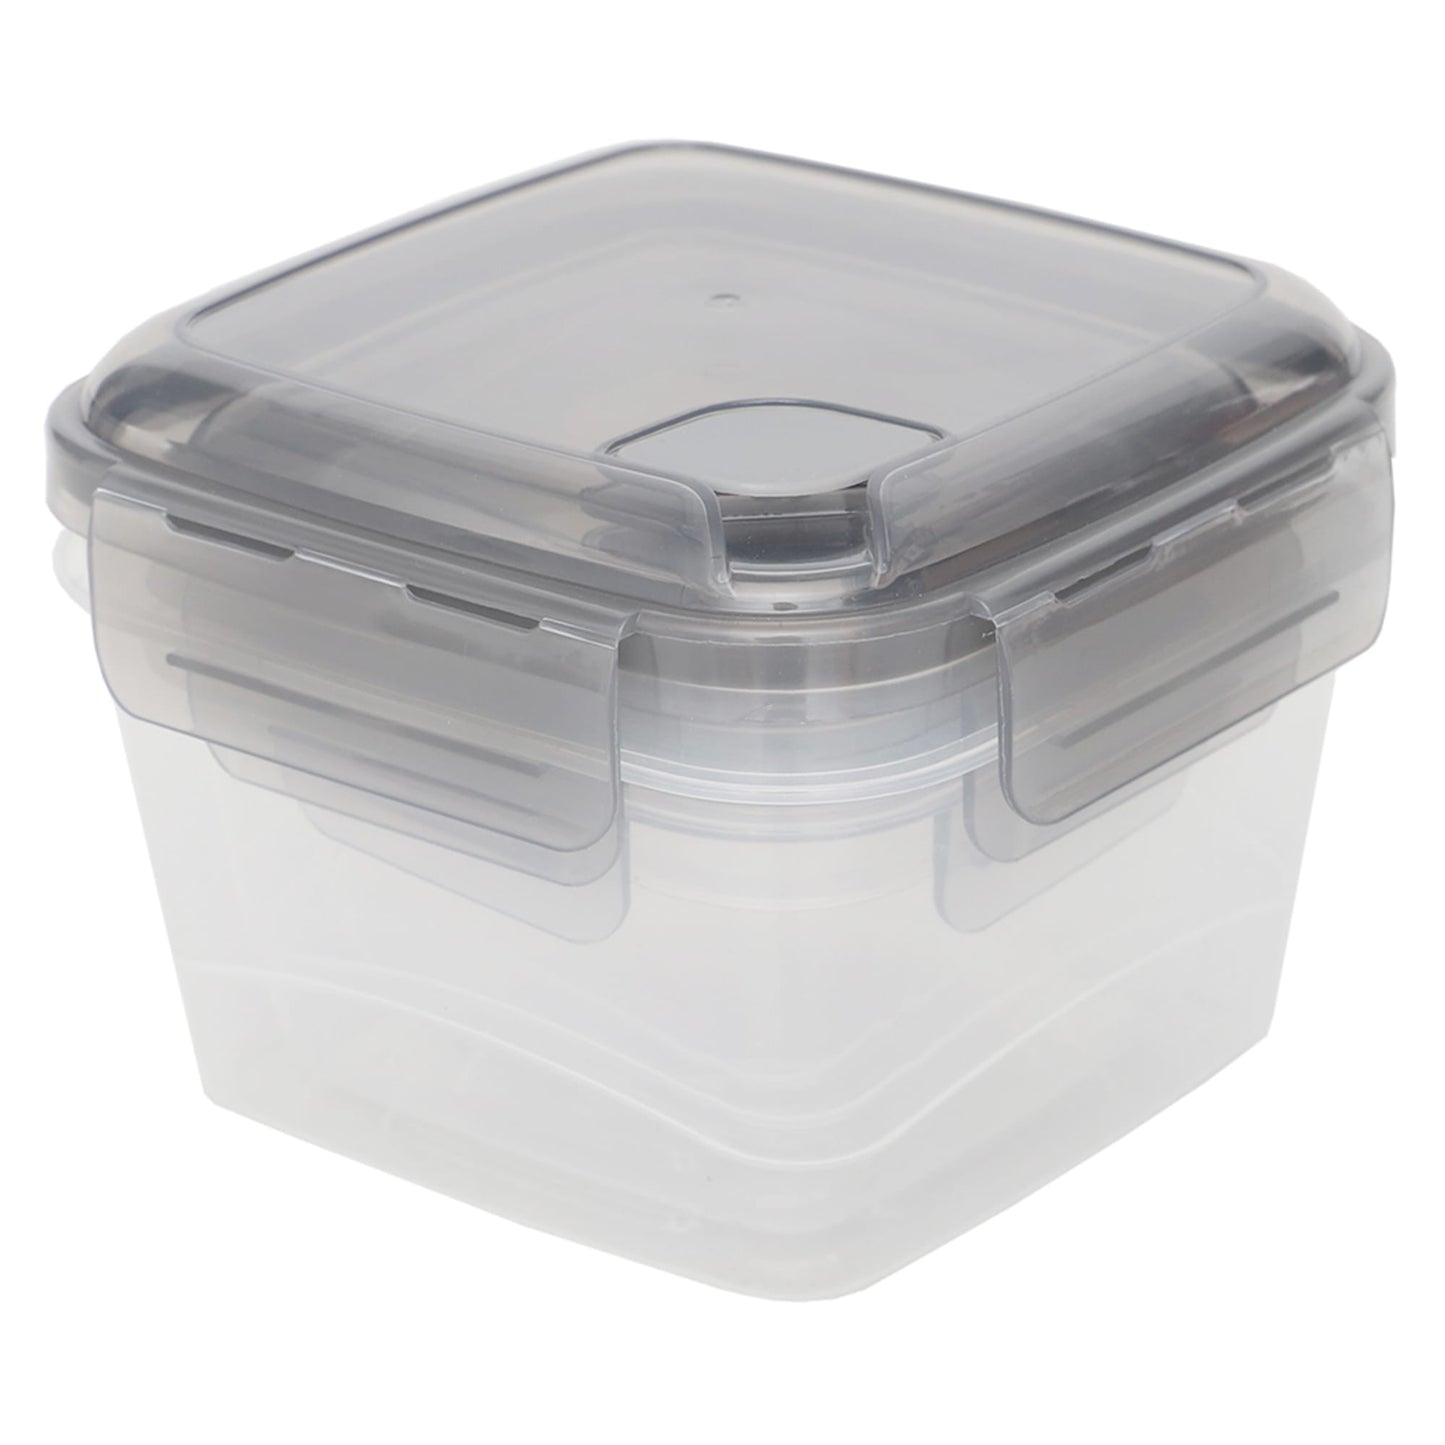 Locking Square Food Storage Containers with Grey Steam Vented Lids, (Set of 6)